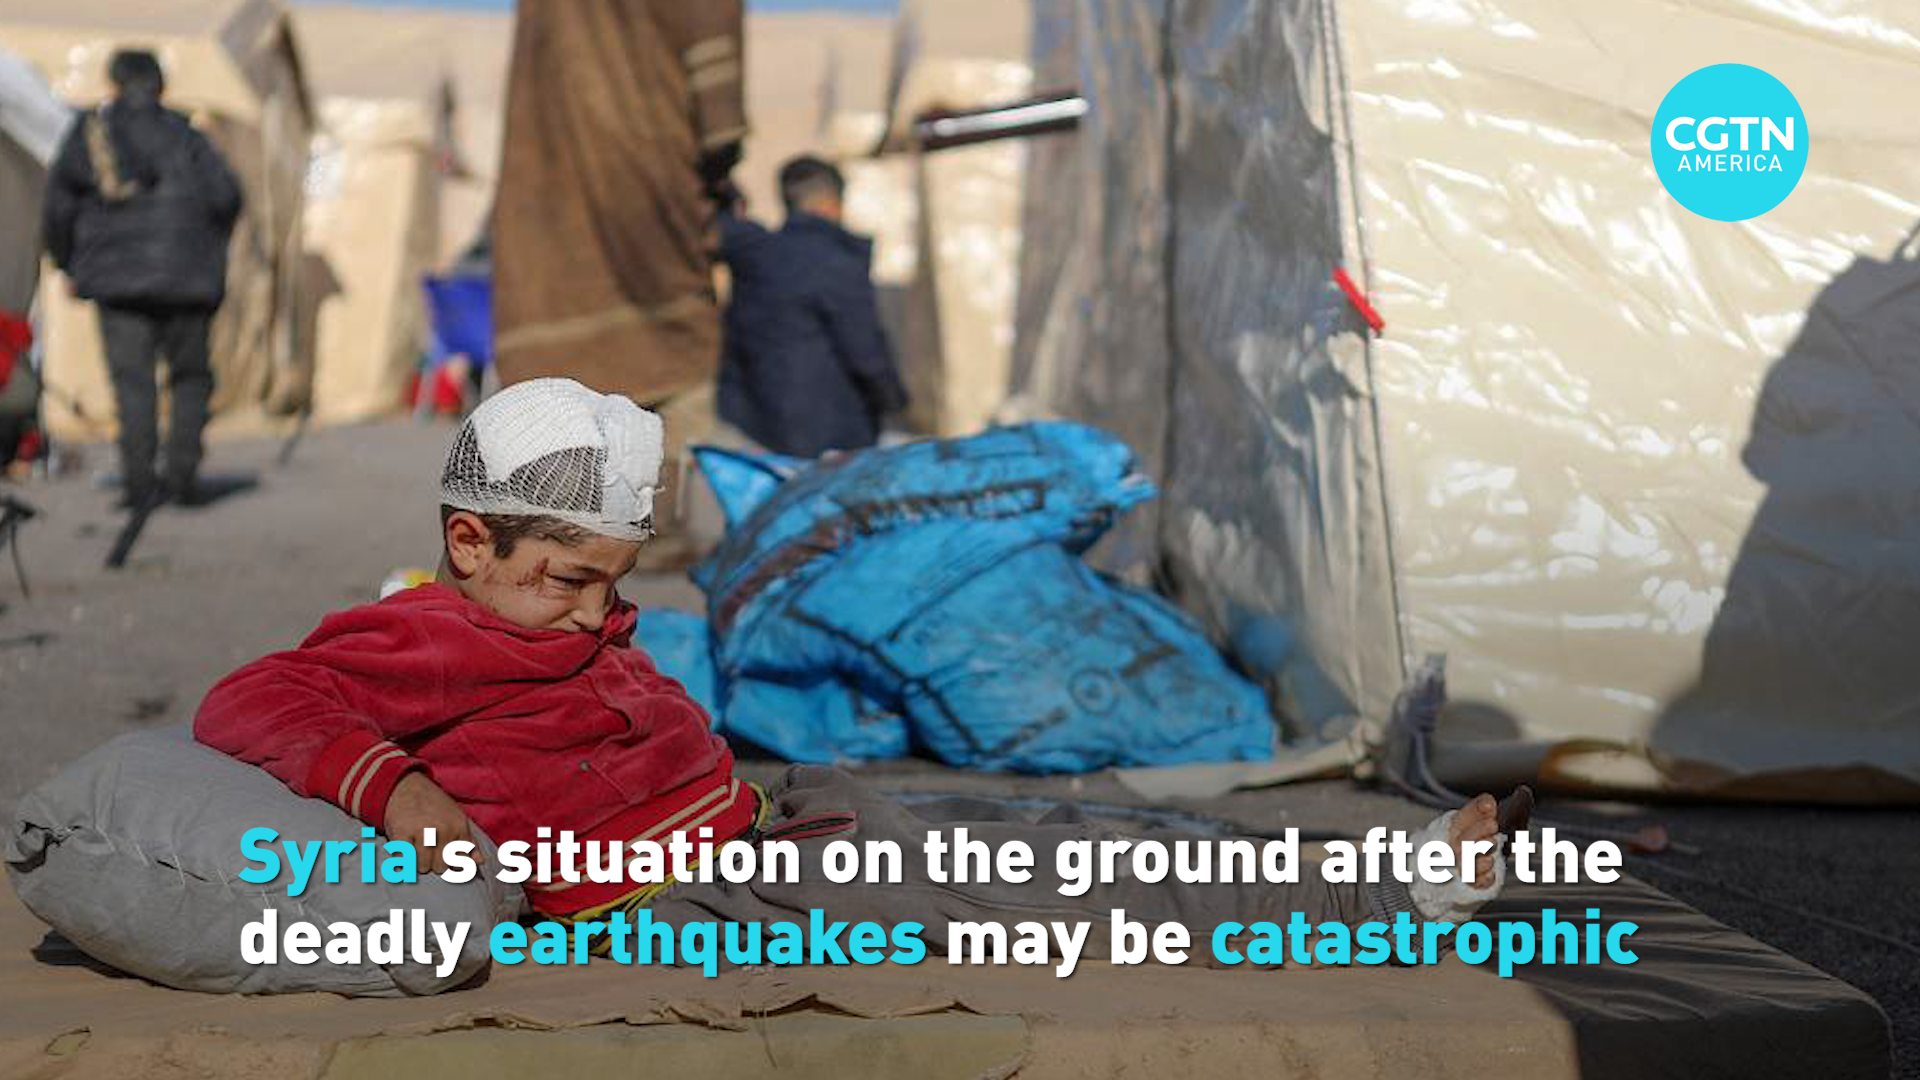 Syria faces complex humanitarian situations after the deadly earthquakes